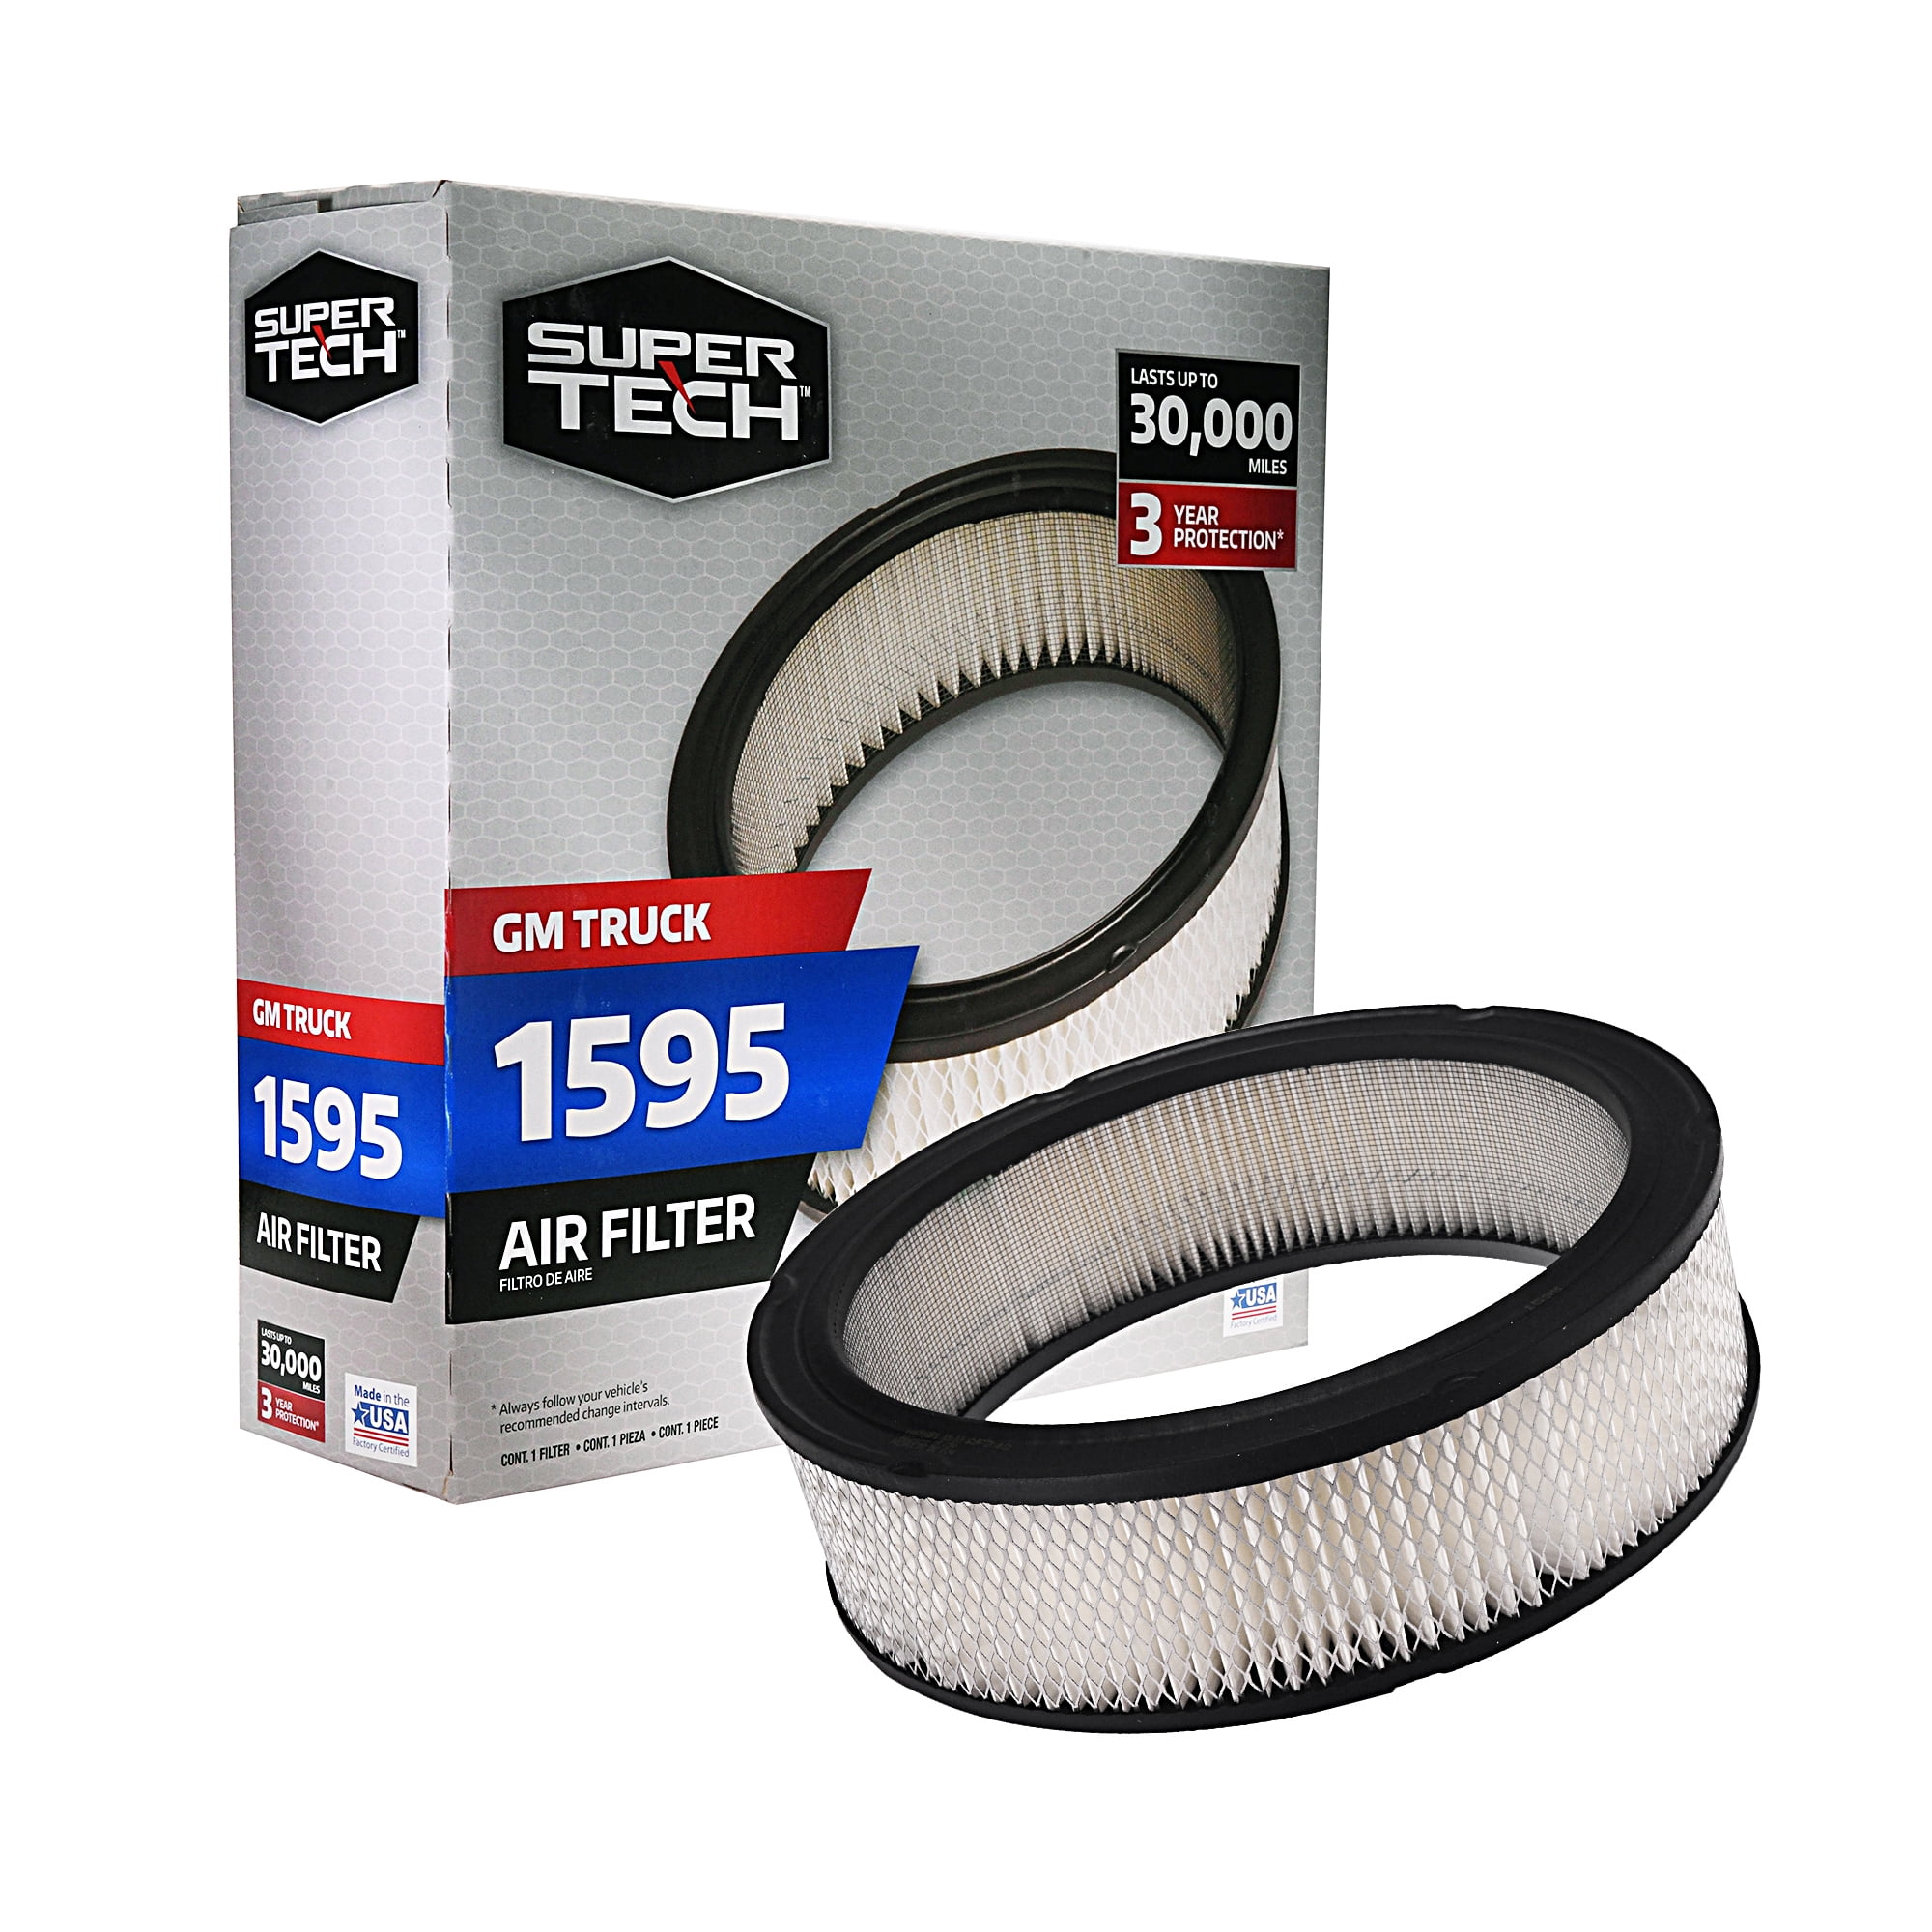 SuperTech 1595 Engine Air Filter, Replacement Filter for GM or GM Truck